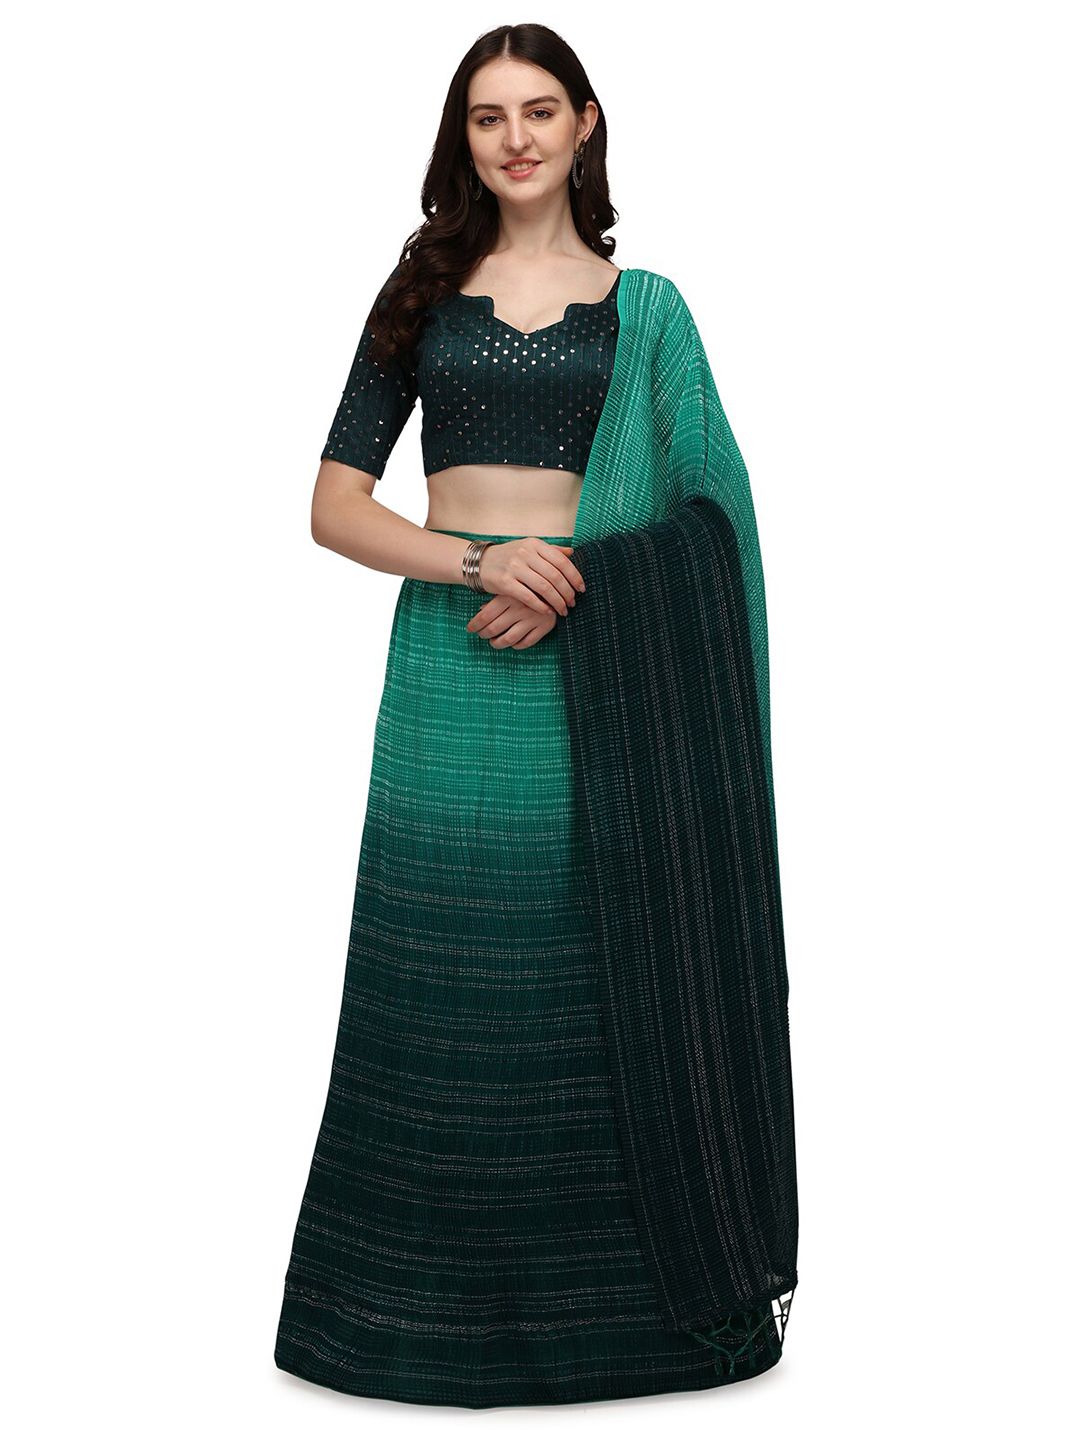 Pratham Blue Green Embroidered Semi-Stitched Lehenga & Unstitched Blouse With Dupatta Price in India